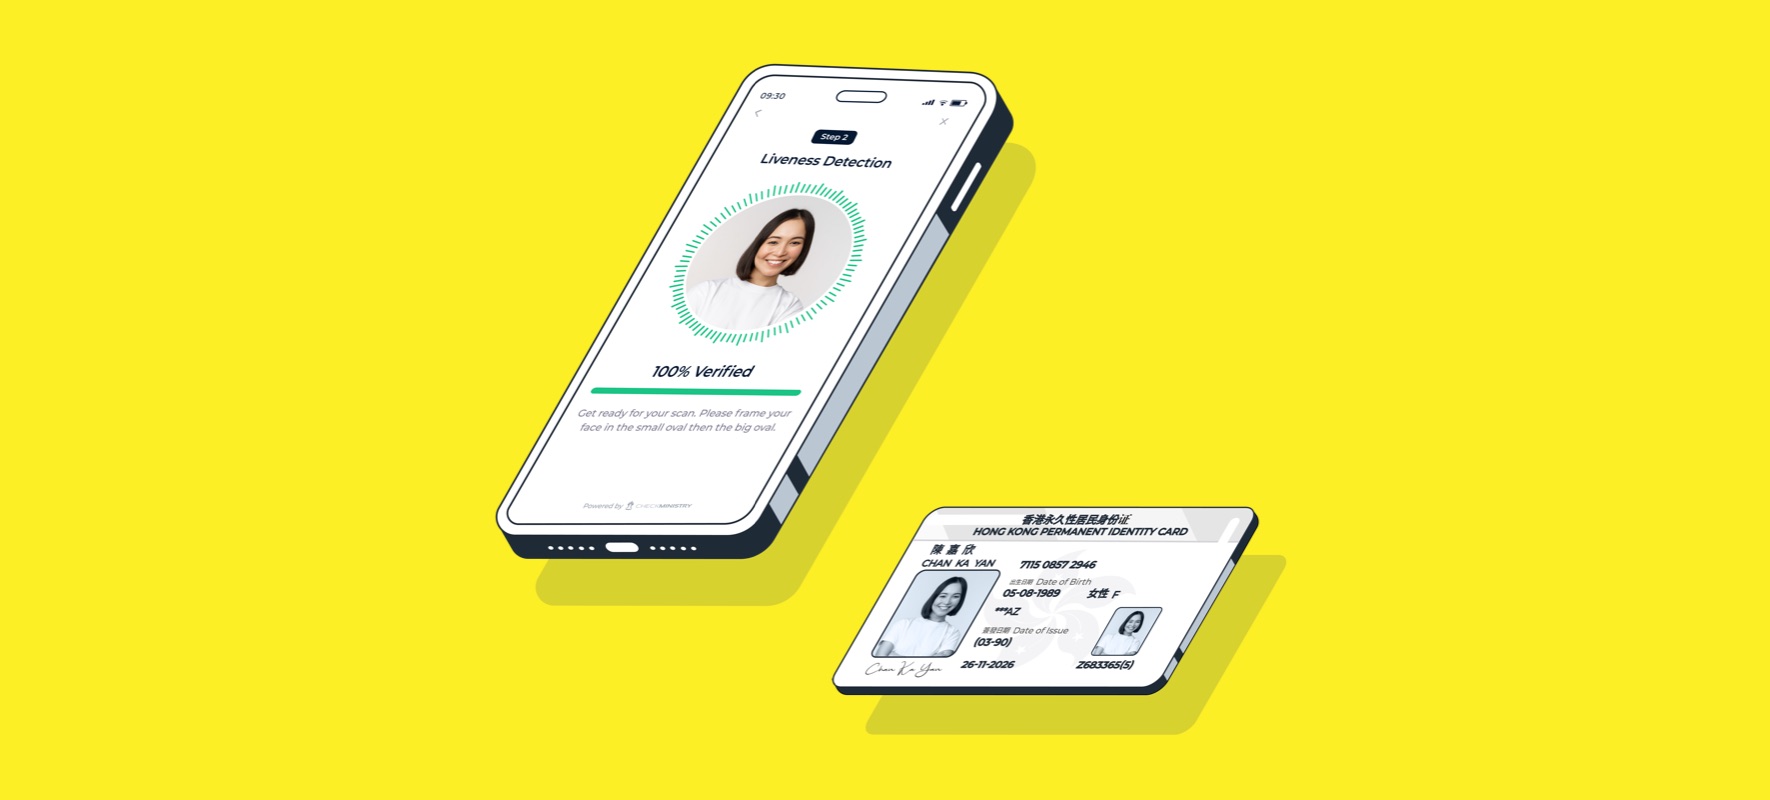 An identity check process depicting how a smartphone is used to scan and verify the details provided on a physical ID card.